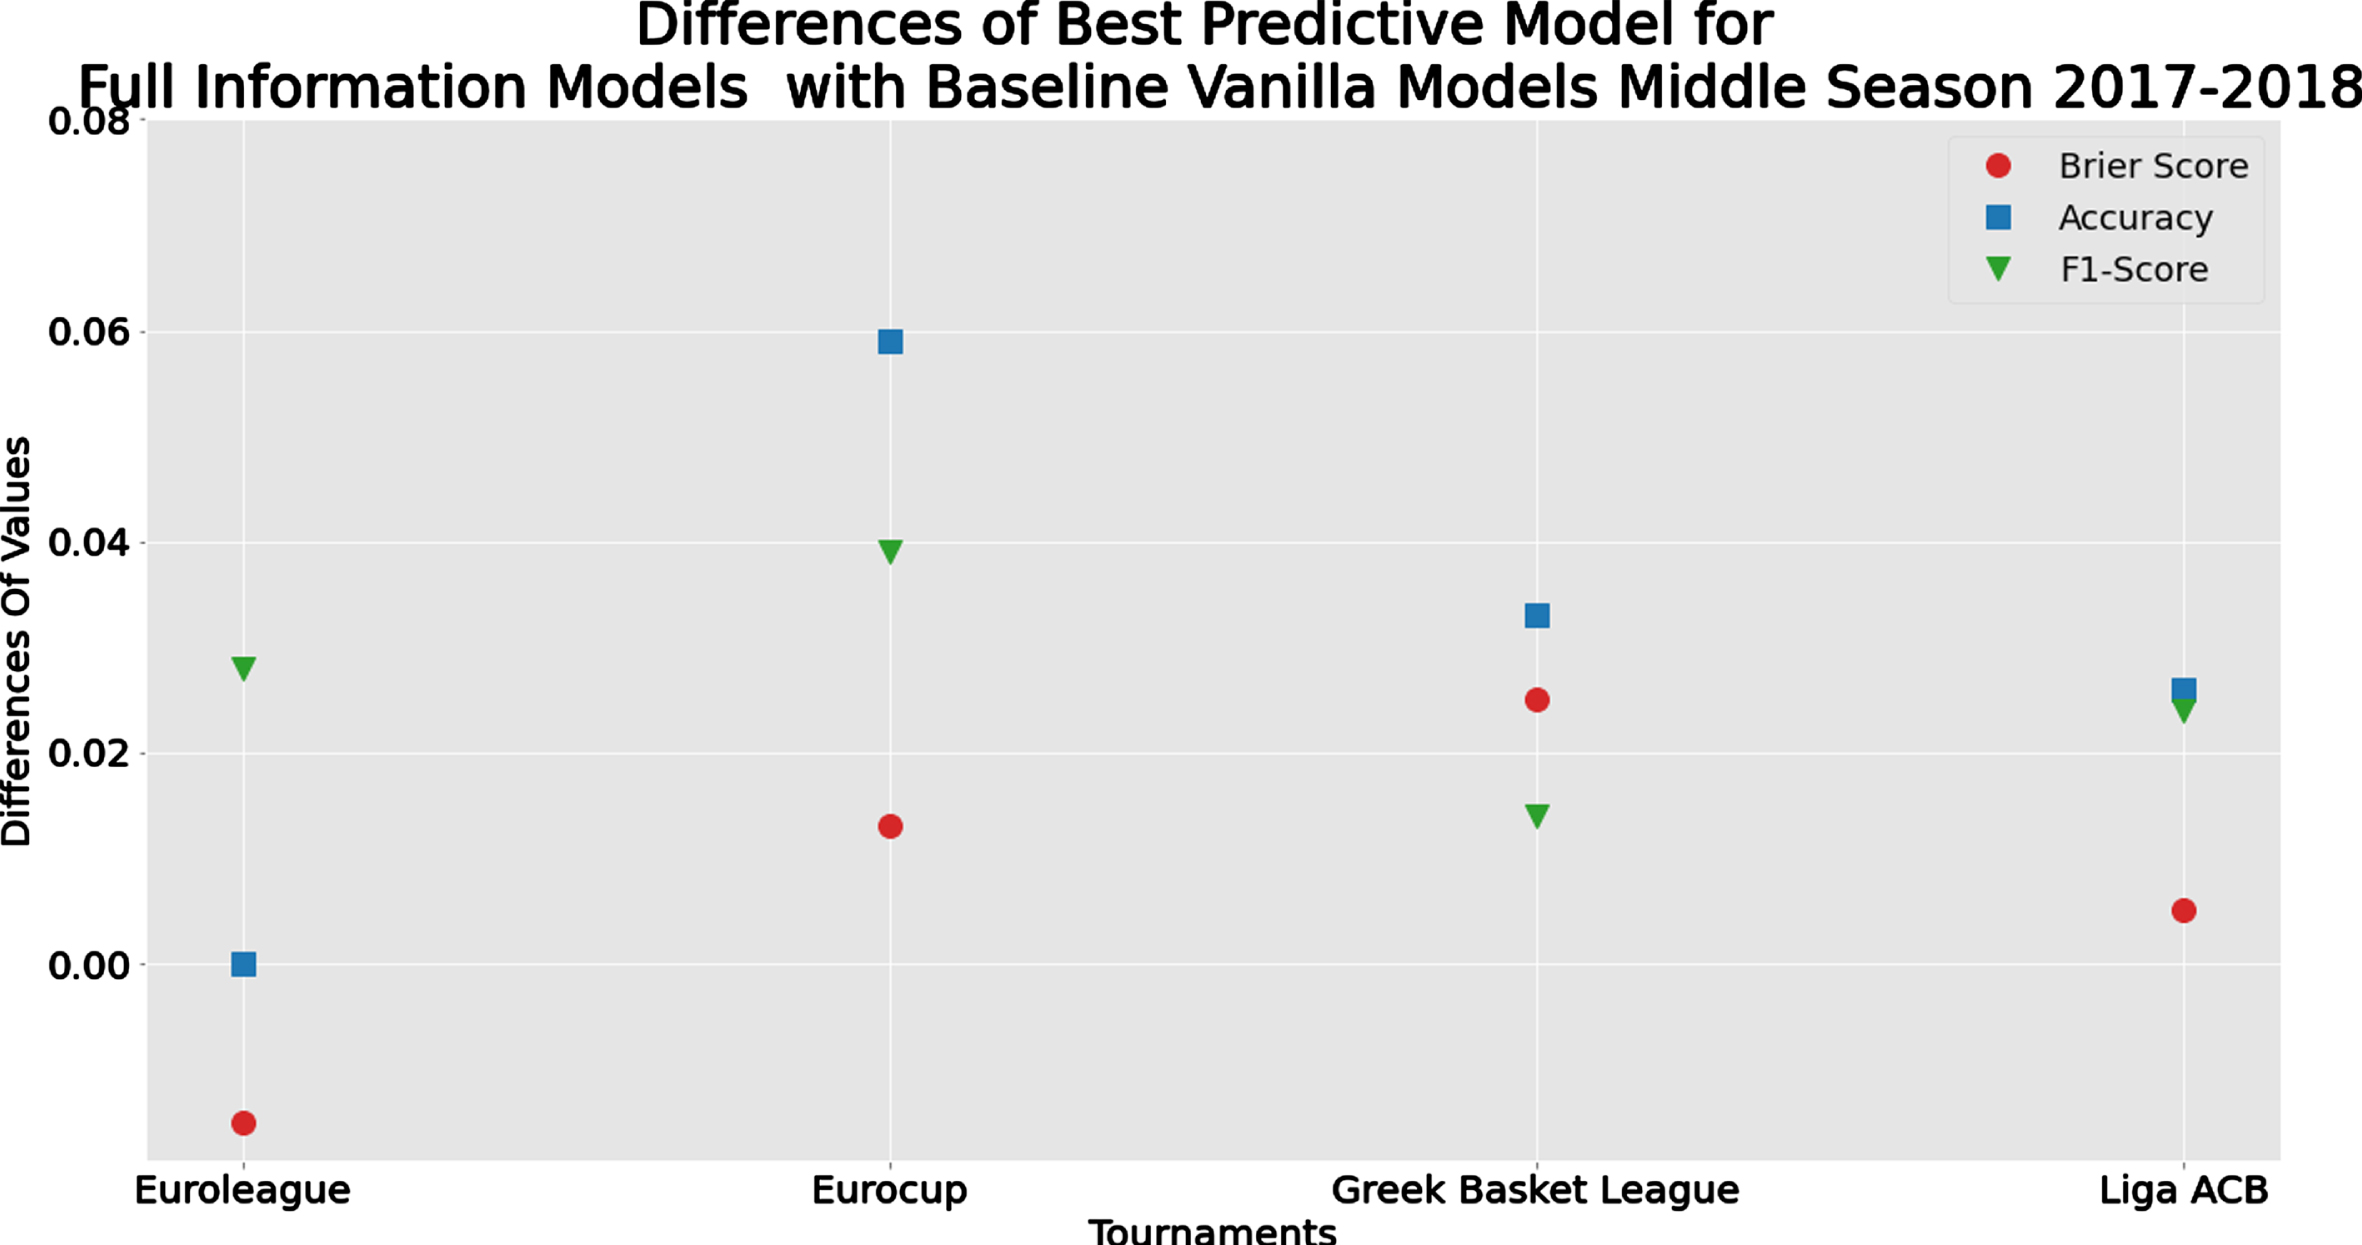 Comparison of the Differences in Evaluation Metrics between the best performed methods of the Full Information and the Baseline Vanilla Model for the mid-season prediction scenario.